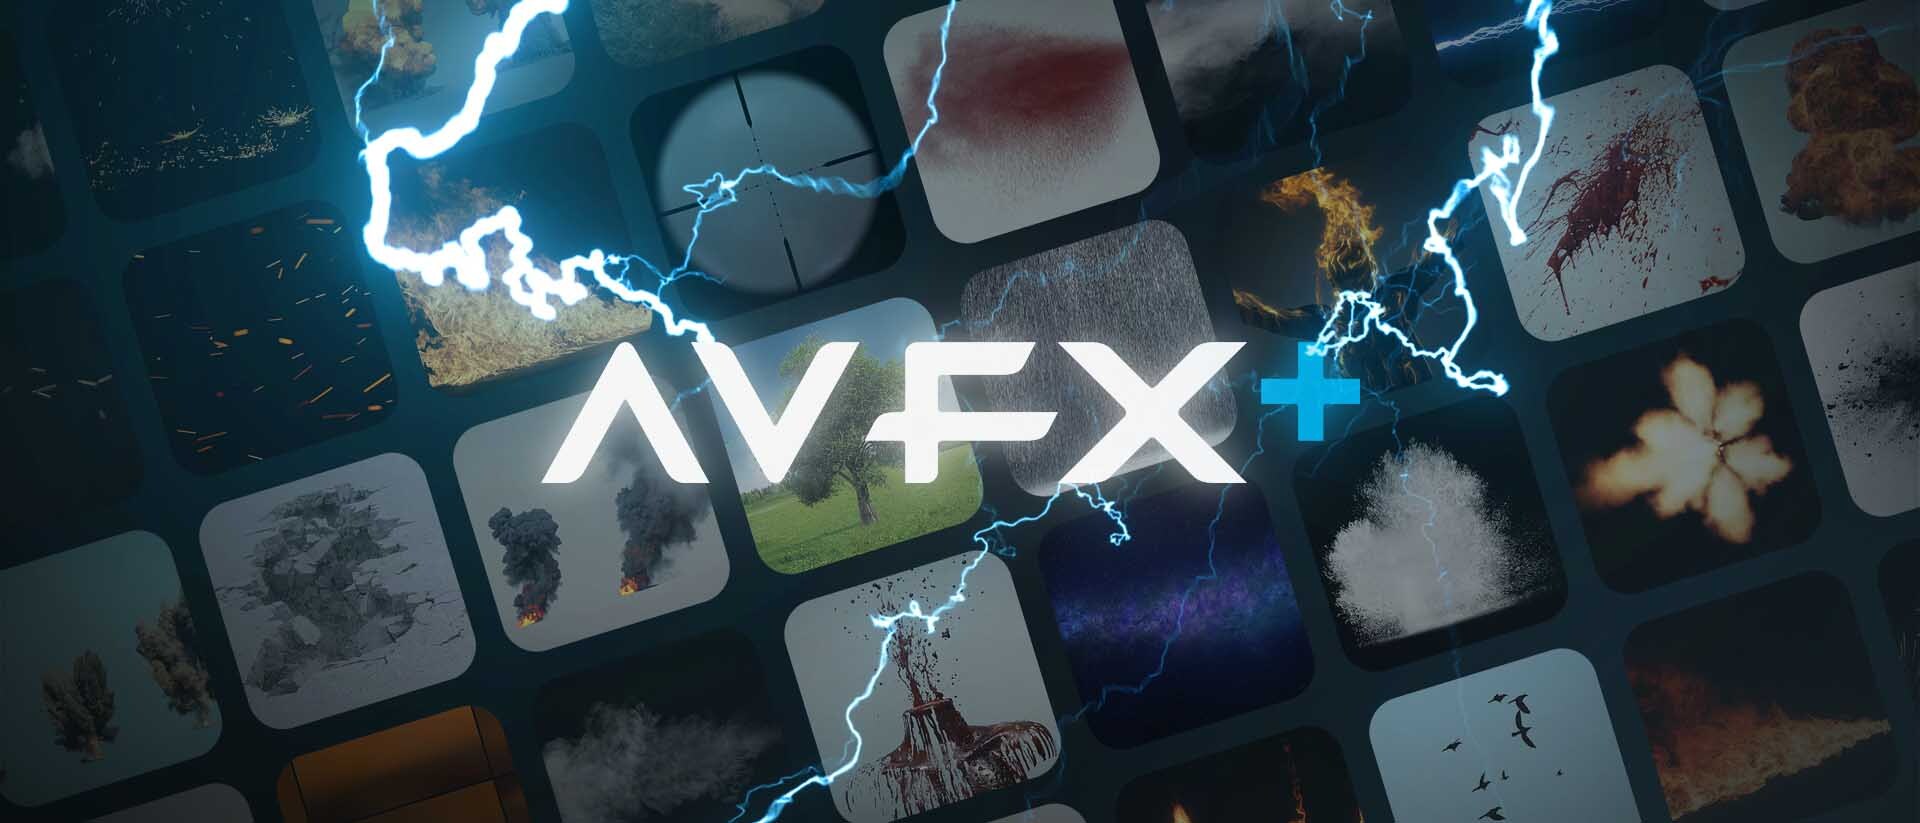 Introducing AVFX+: Instant Access To The World’s Largest Library of Production-Quality VFX Assets